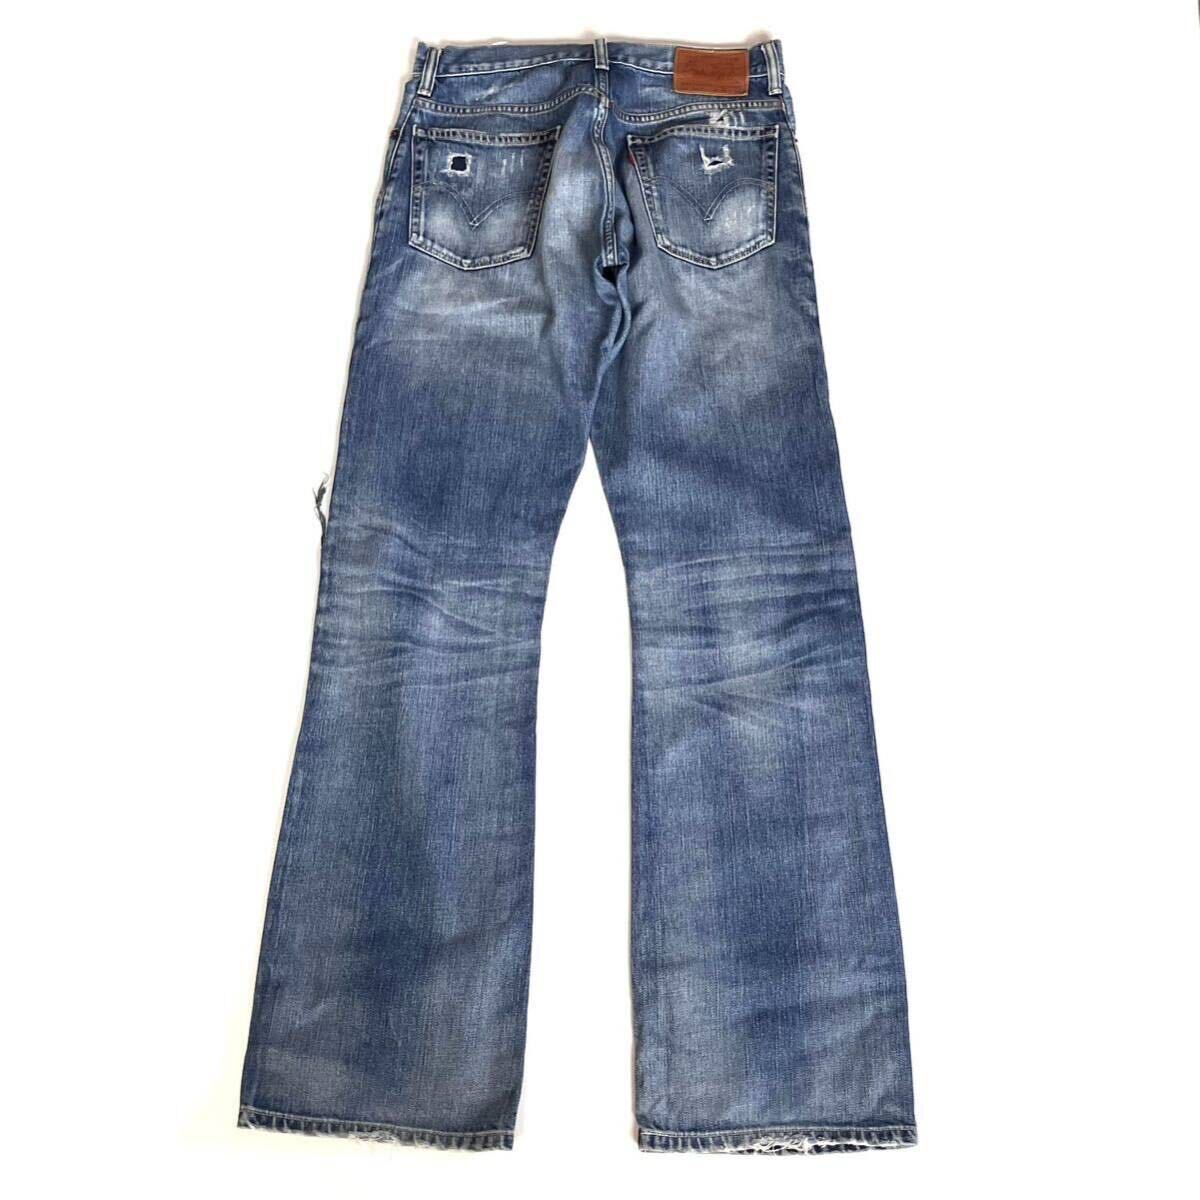 ★☆W30inch-76.20cm☆★Levi's517 EOP→End of Production★☆ファンキーダメージ！☆★_画像3